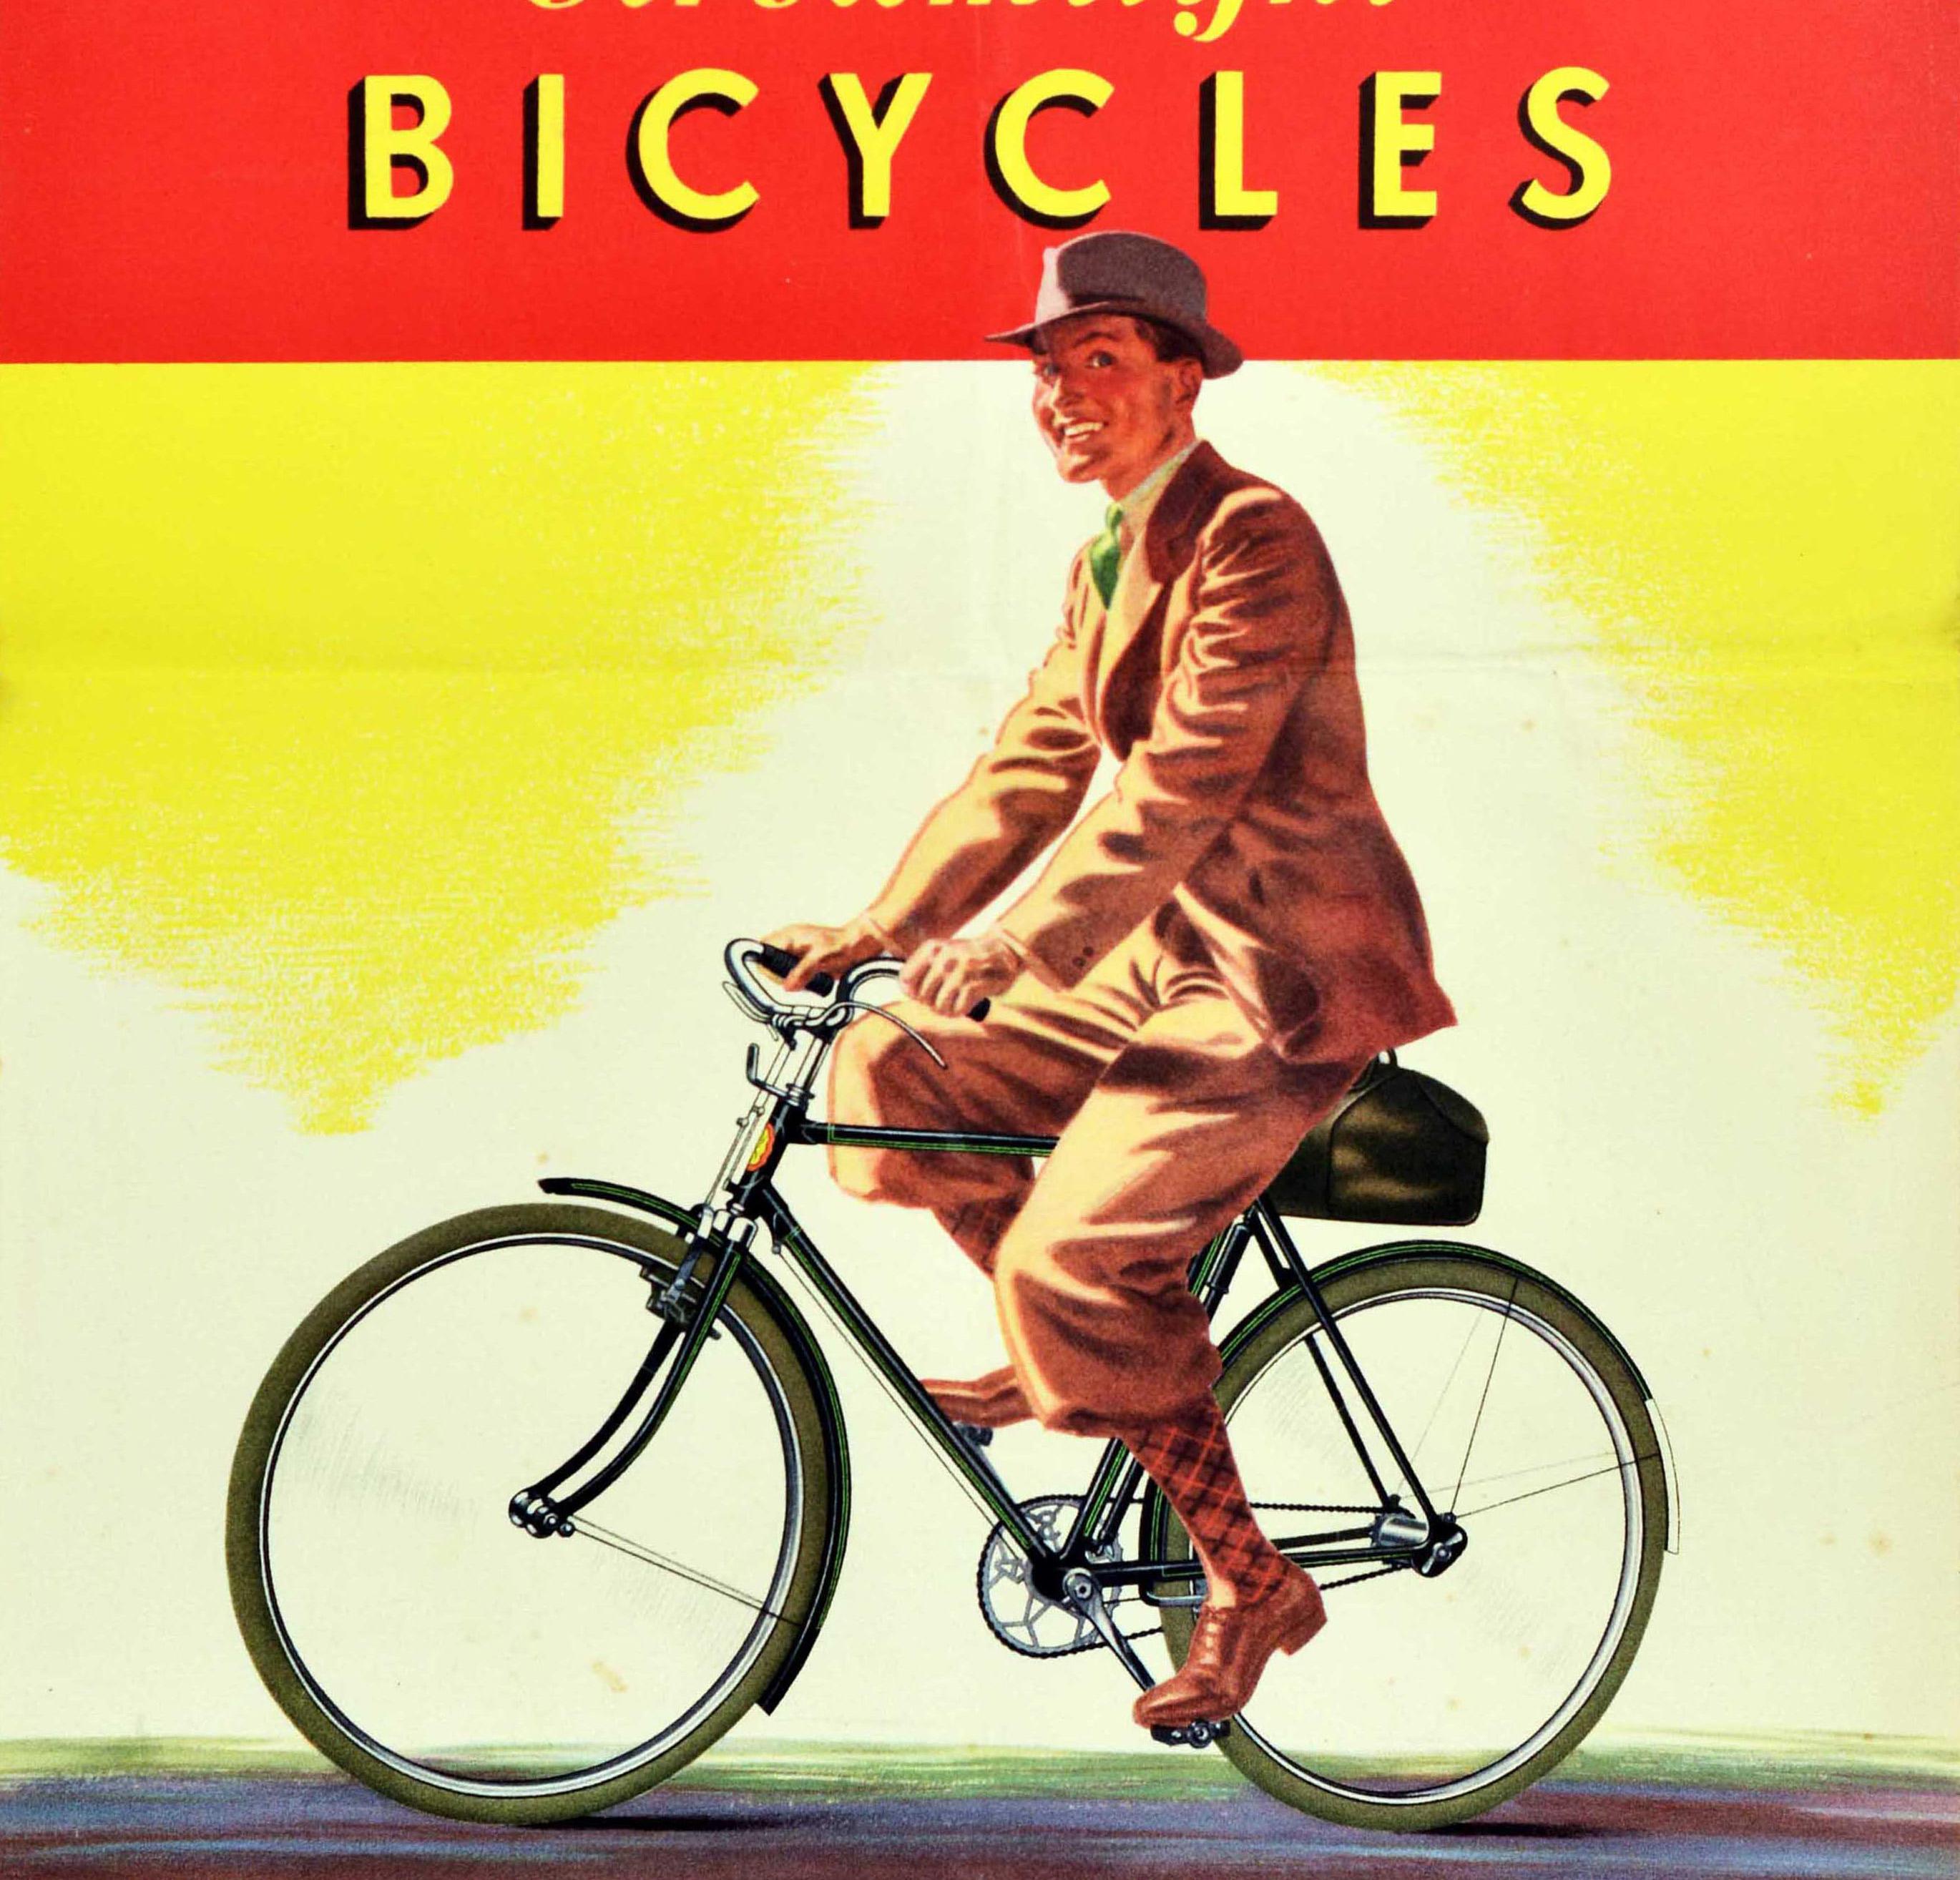 Original vintage advertising poster for BSA Streamlight Bicycles featuring a colourful image of a smartly dressed cyclist smiling to the viewer as he rides his new bike below the text in bold yellow lettering on a red background. Founded in 1861 the